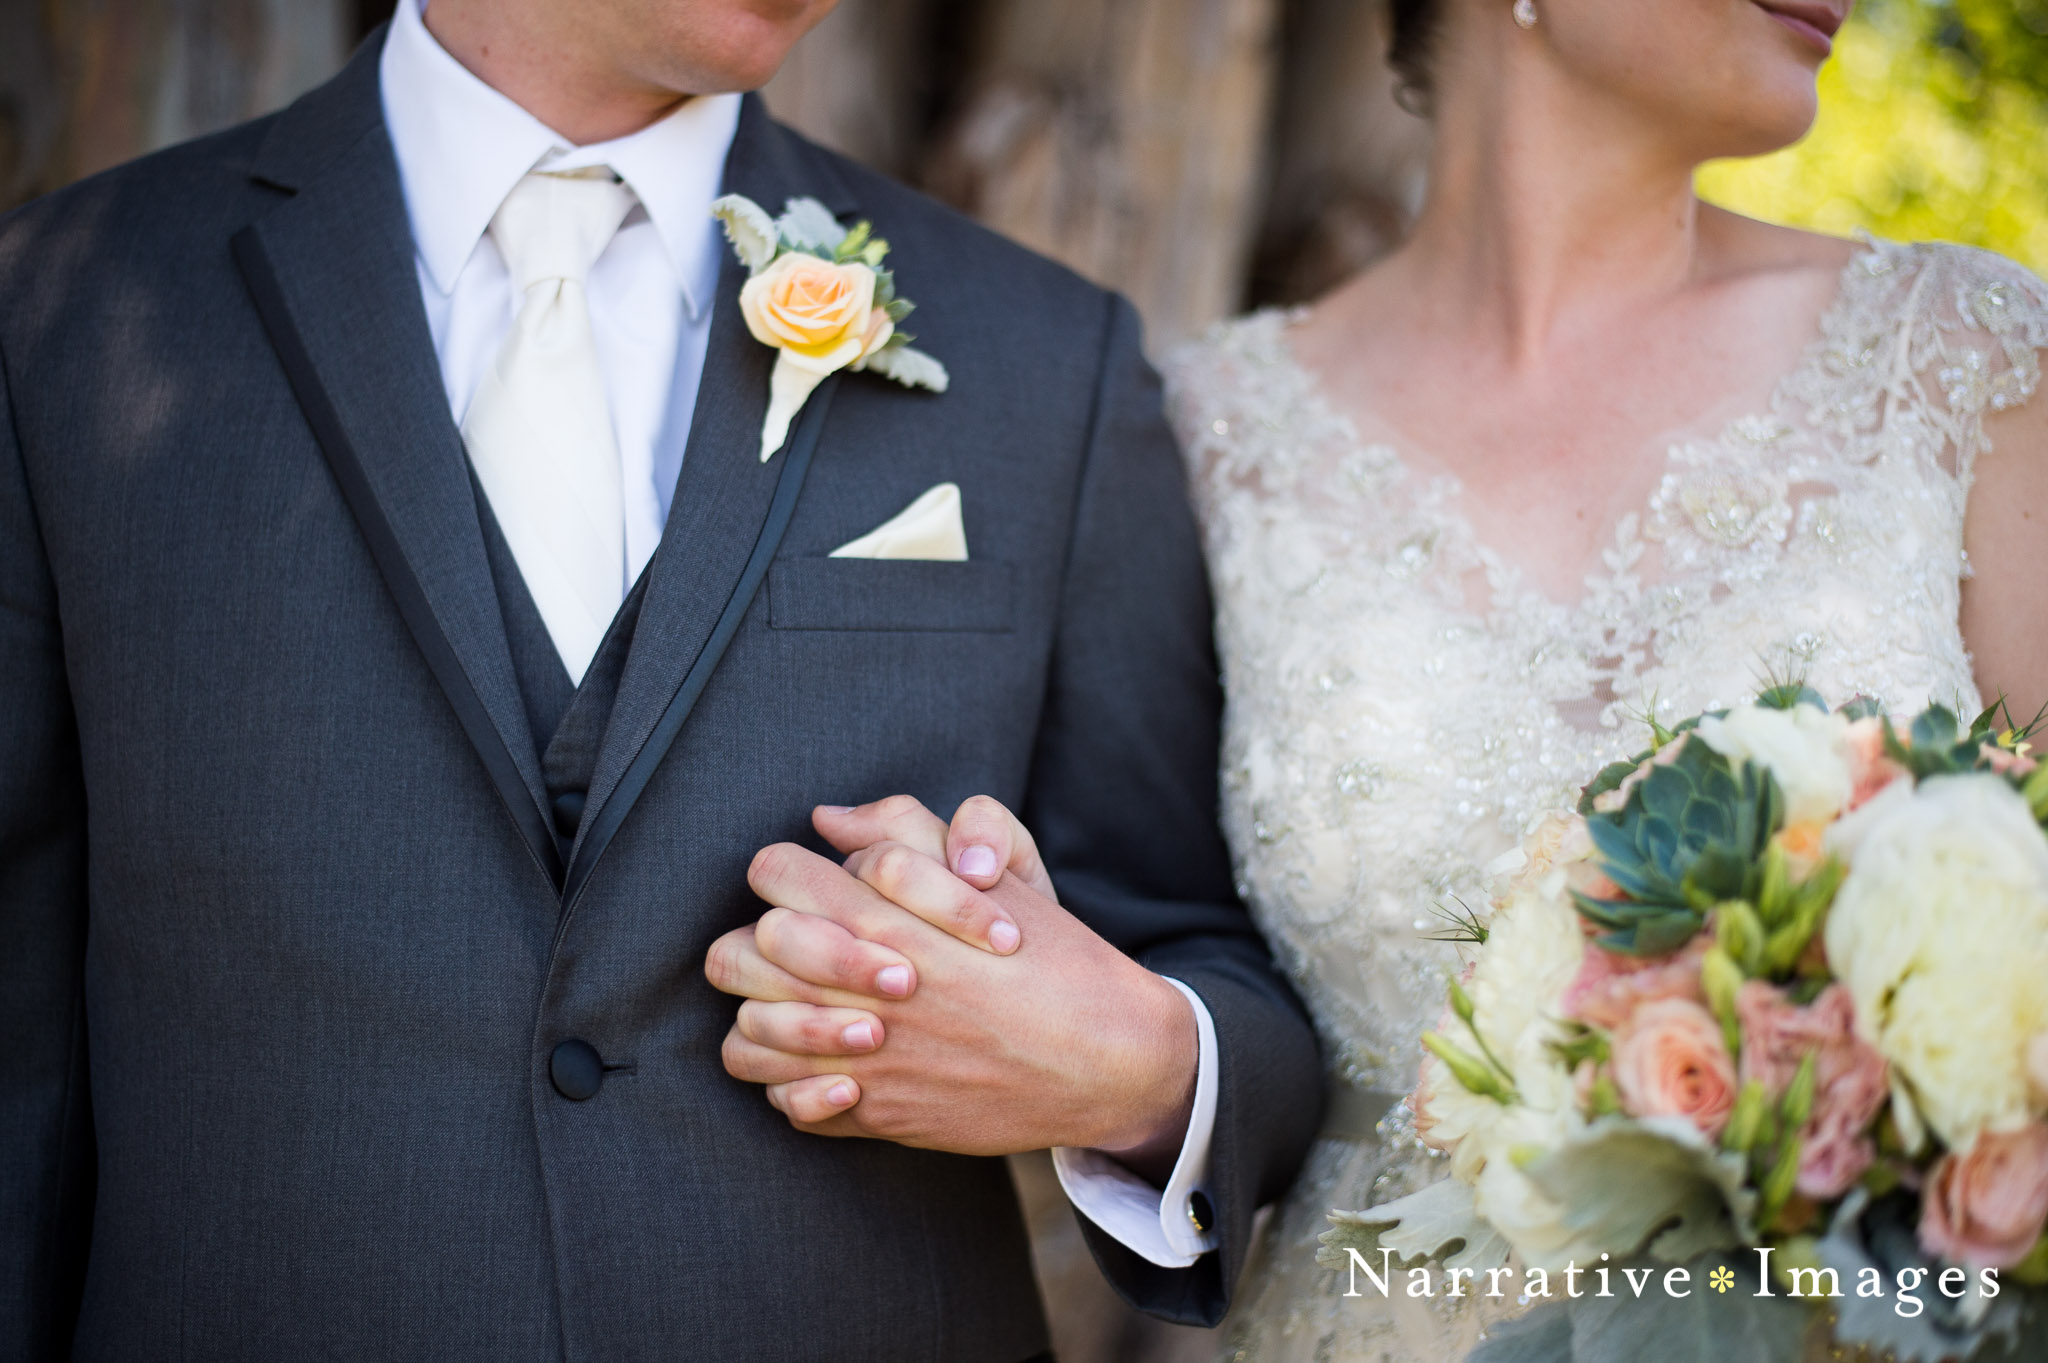 A detail shot of Groom and Bride's dress and tux and flowers